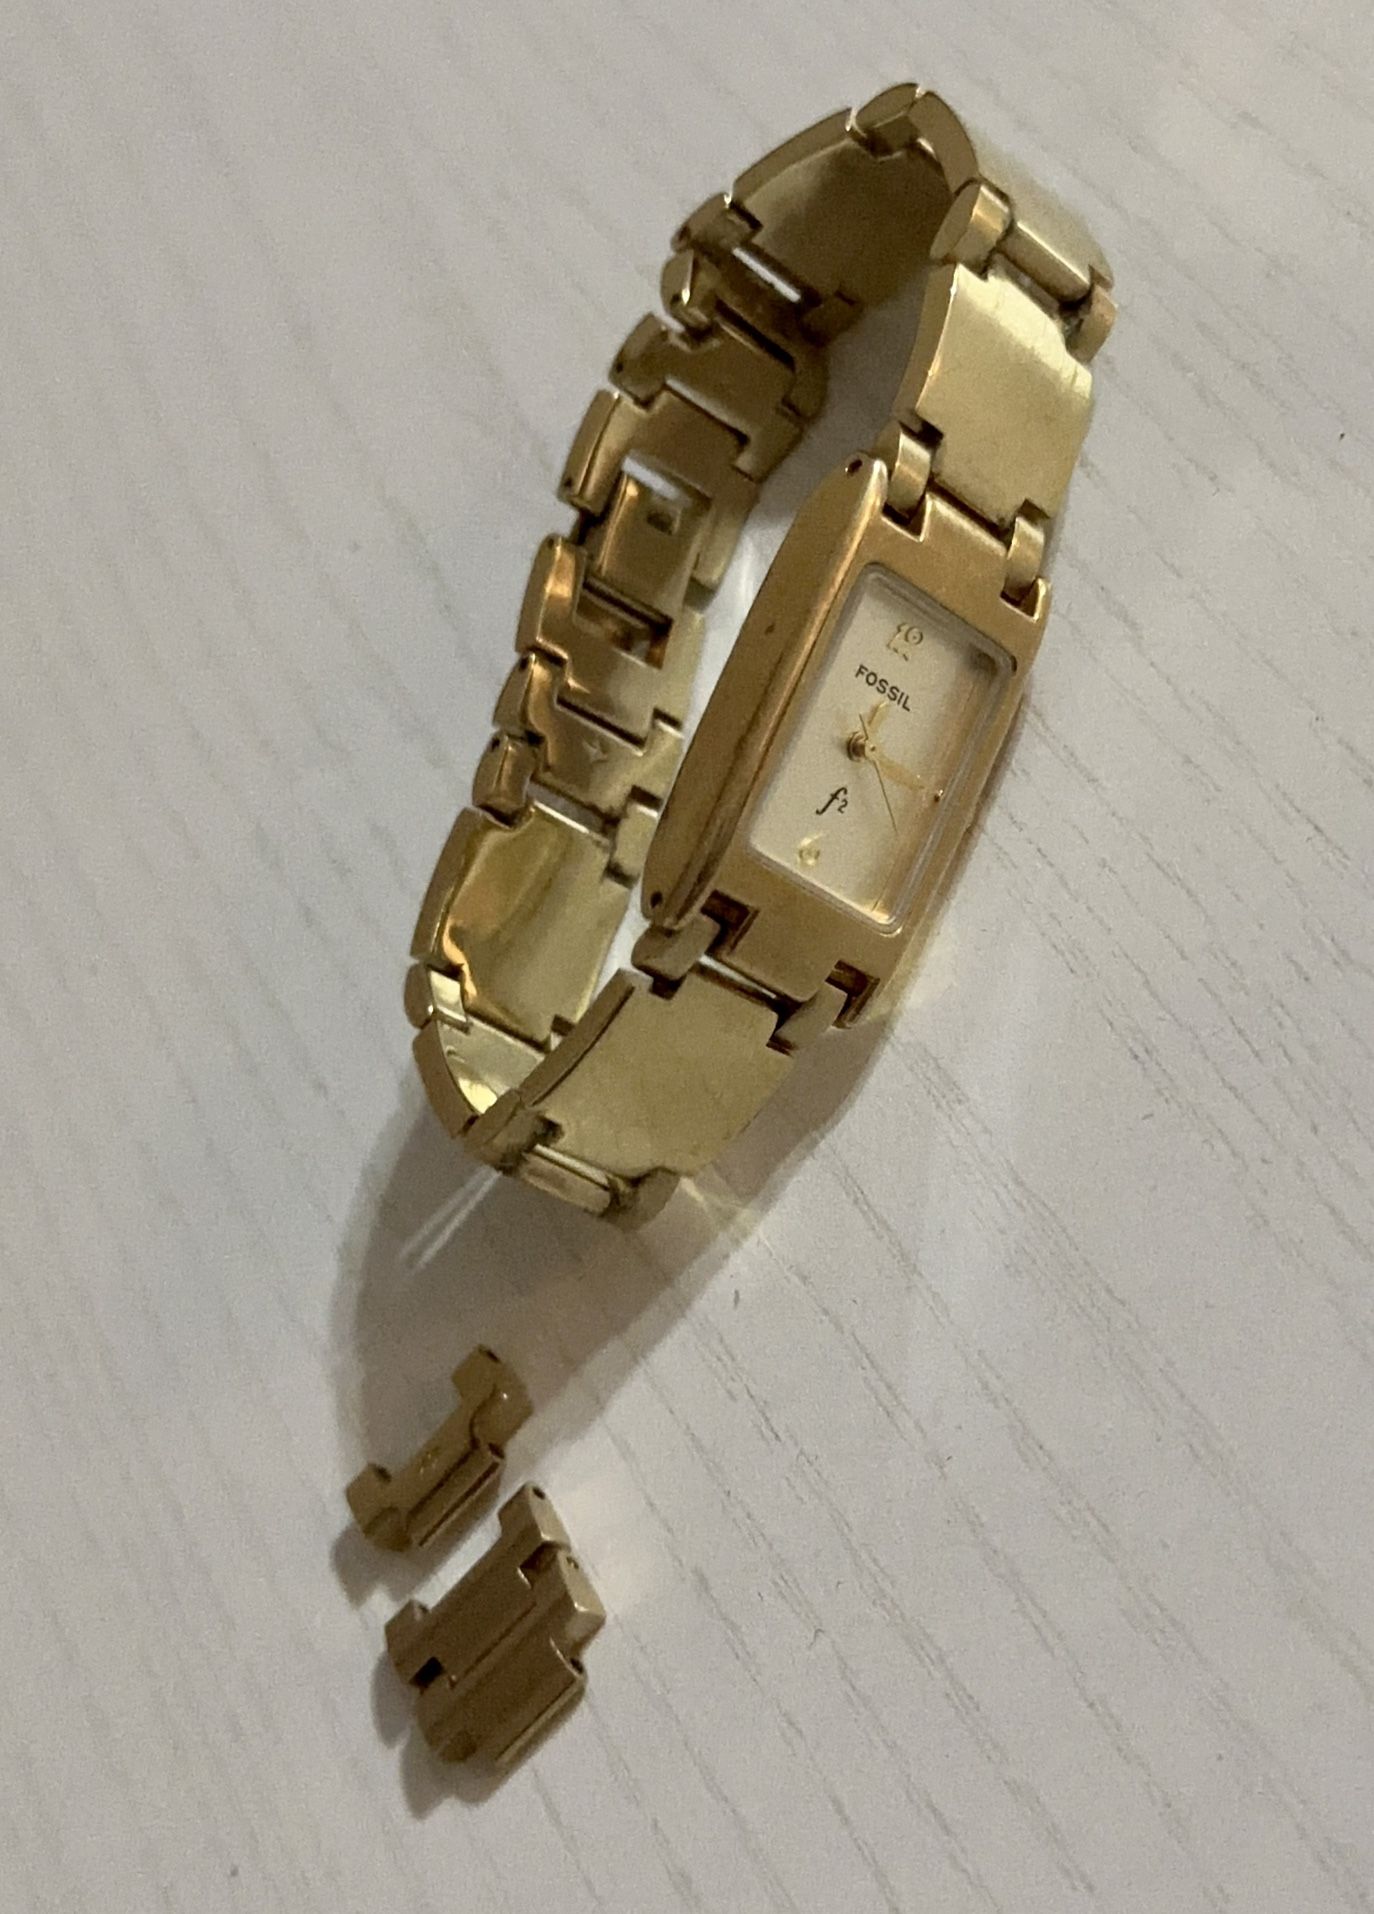 Vintage Fossil Watch Gold Tone With Extra Links F2 ES8803